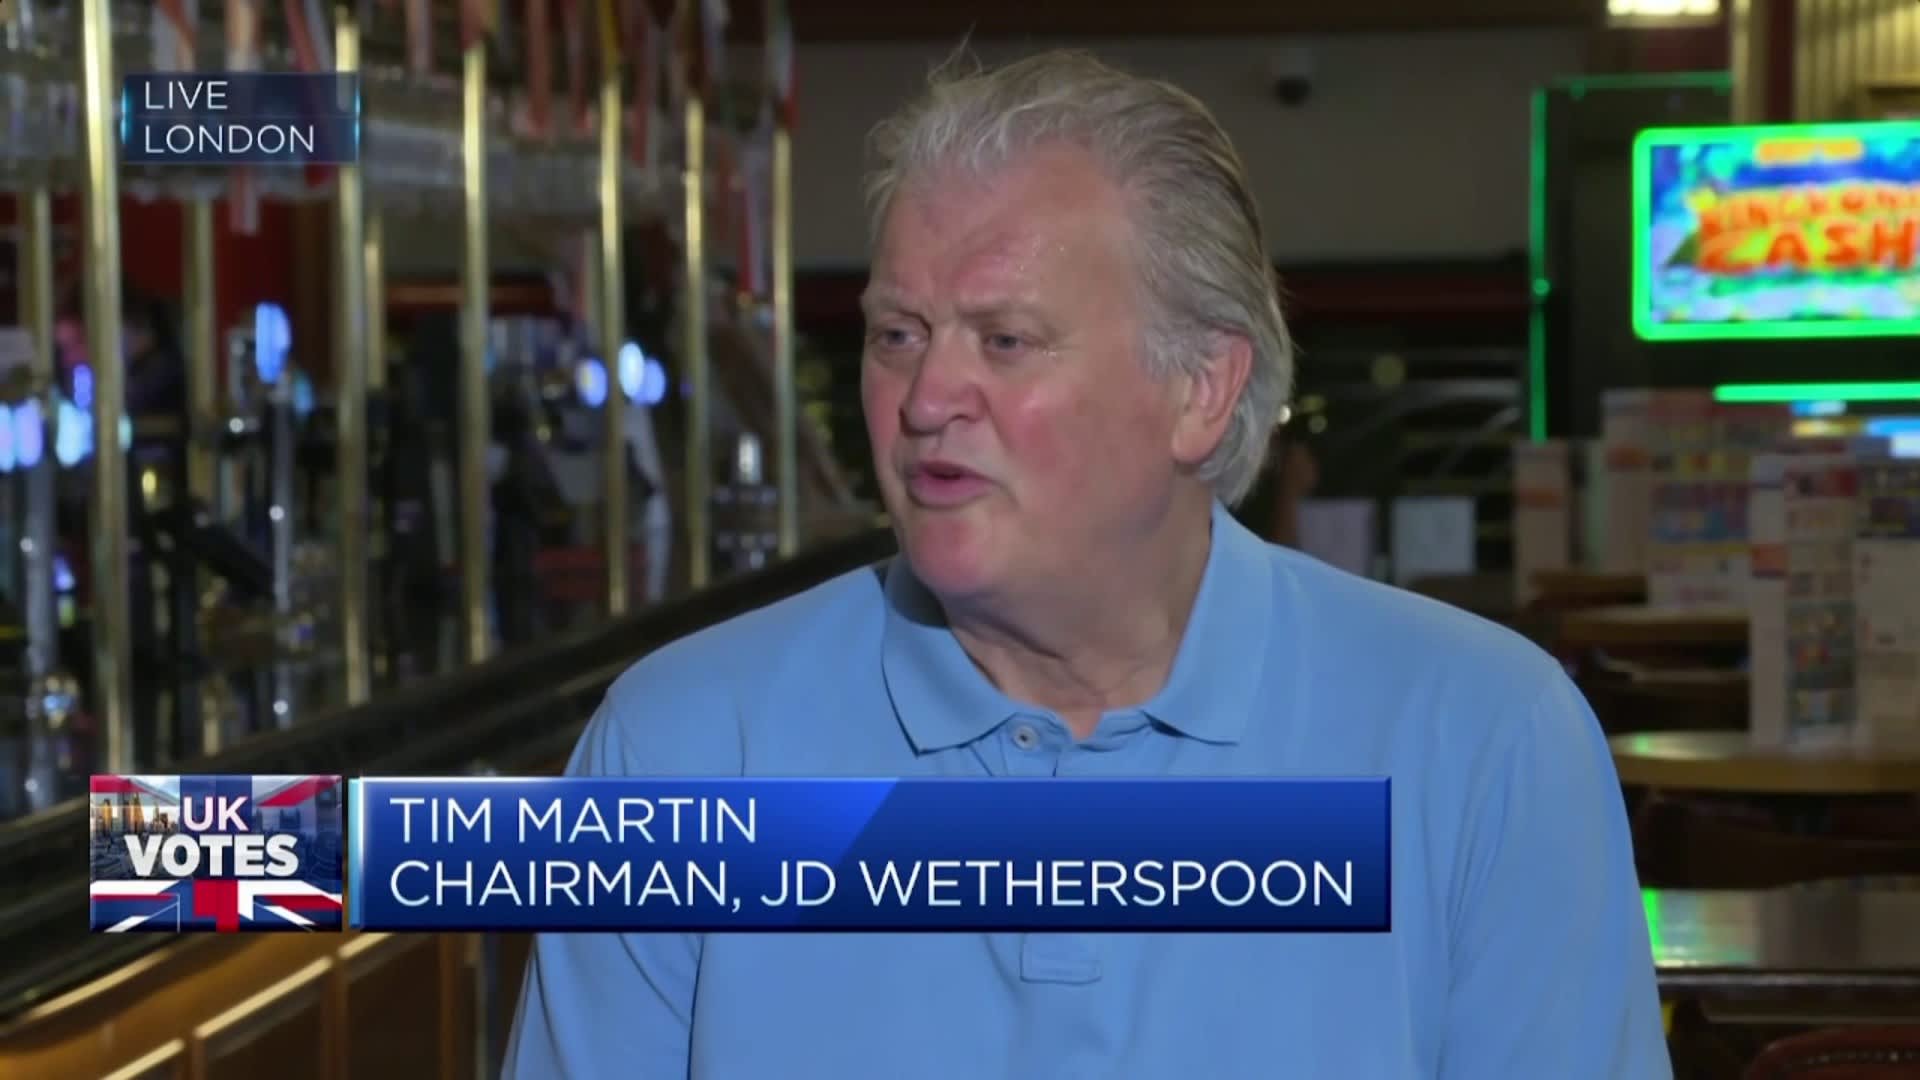 JD Wetherspoon Chairman says UK government has been 'dire in understanding what makes business tick'